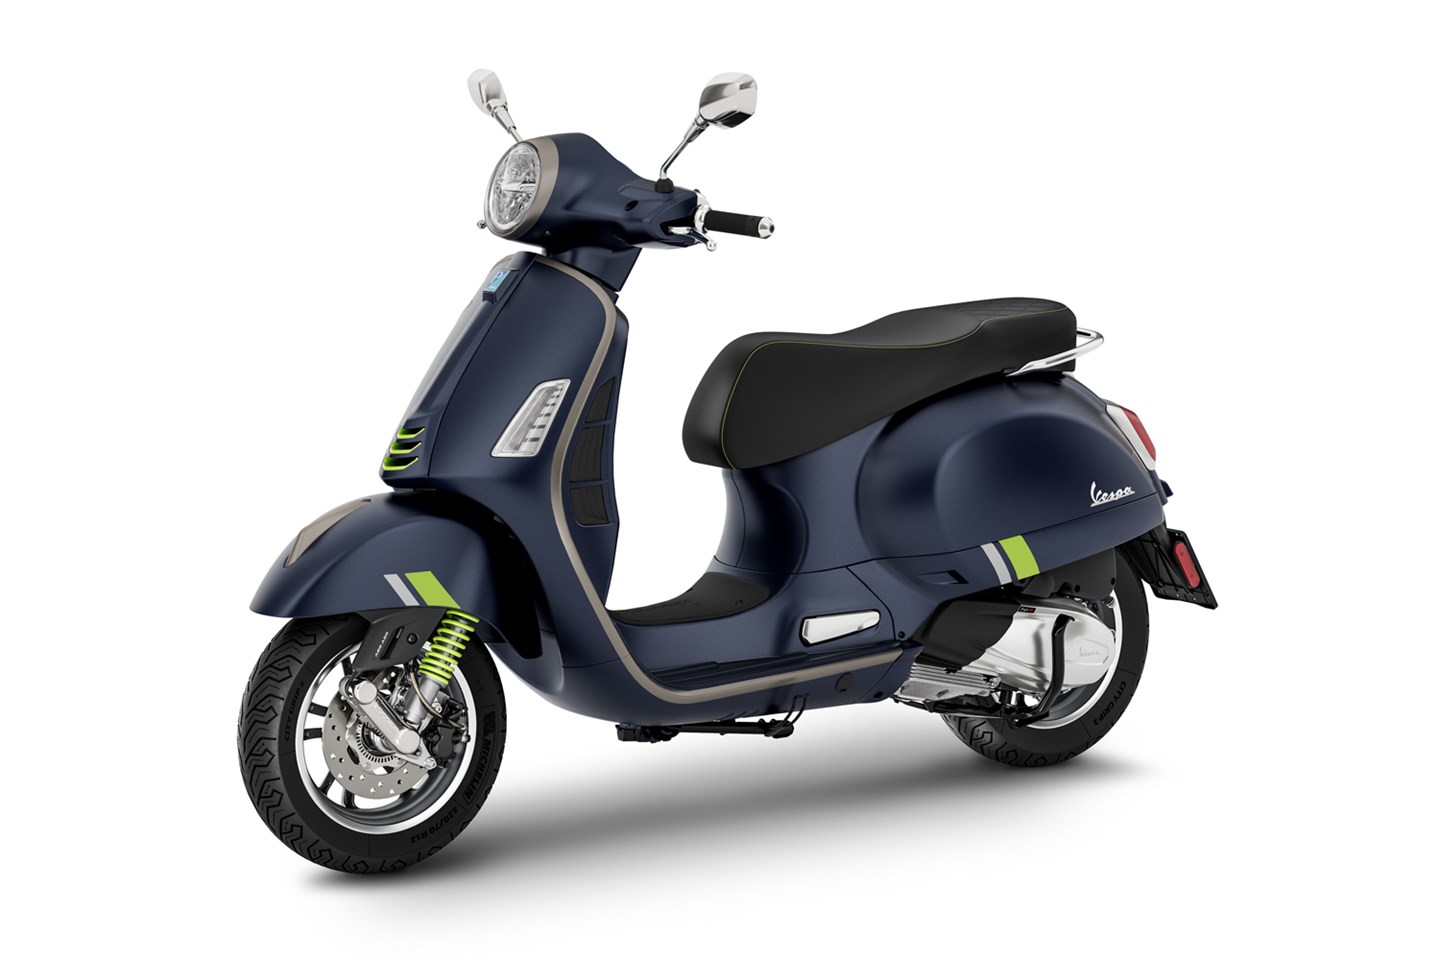 https://mcn-images.bauersecure.com/wp-images/190622/1440x960/vespa_gts_300_01.jpg?mode=max&quality=90&scale=down